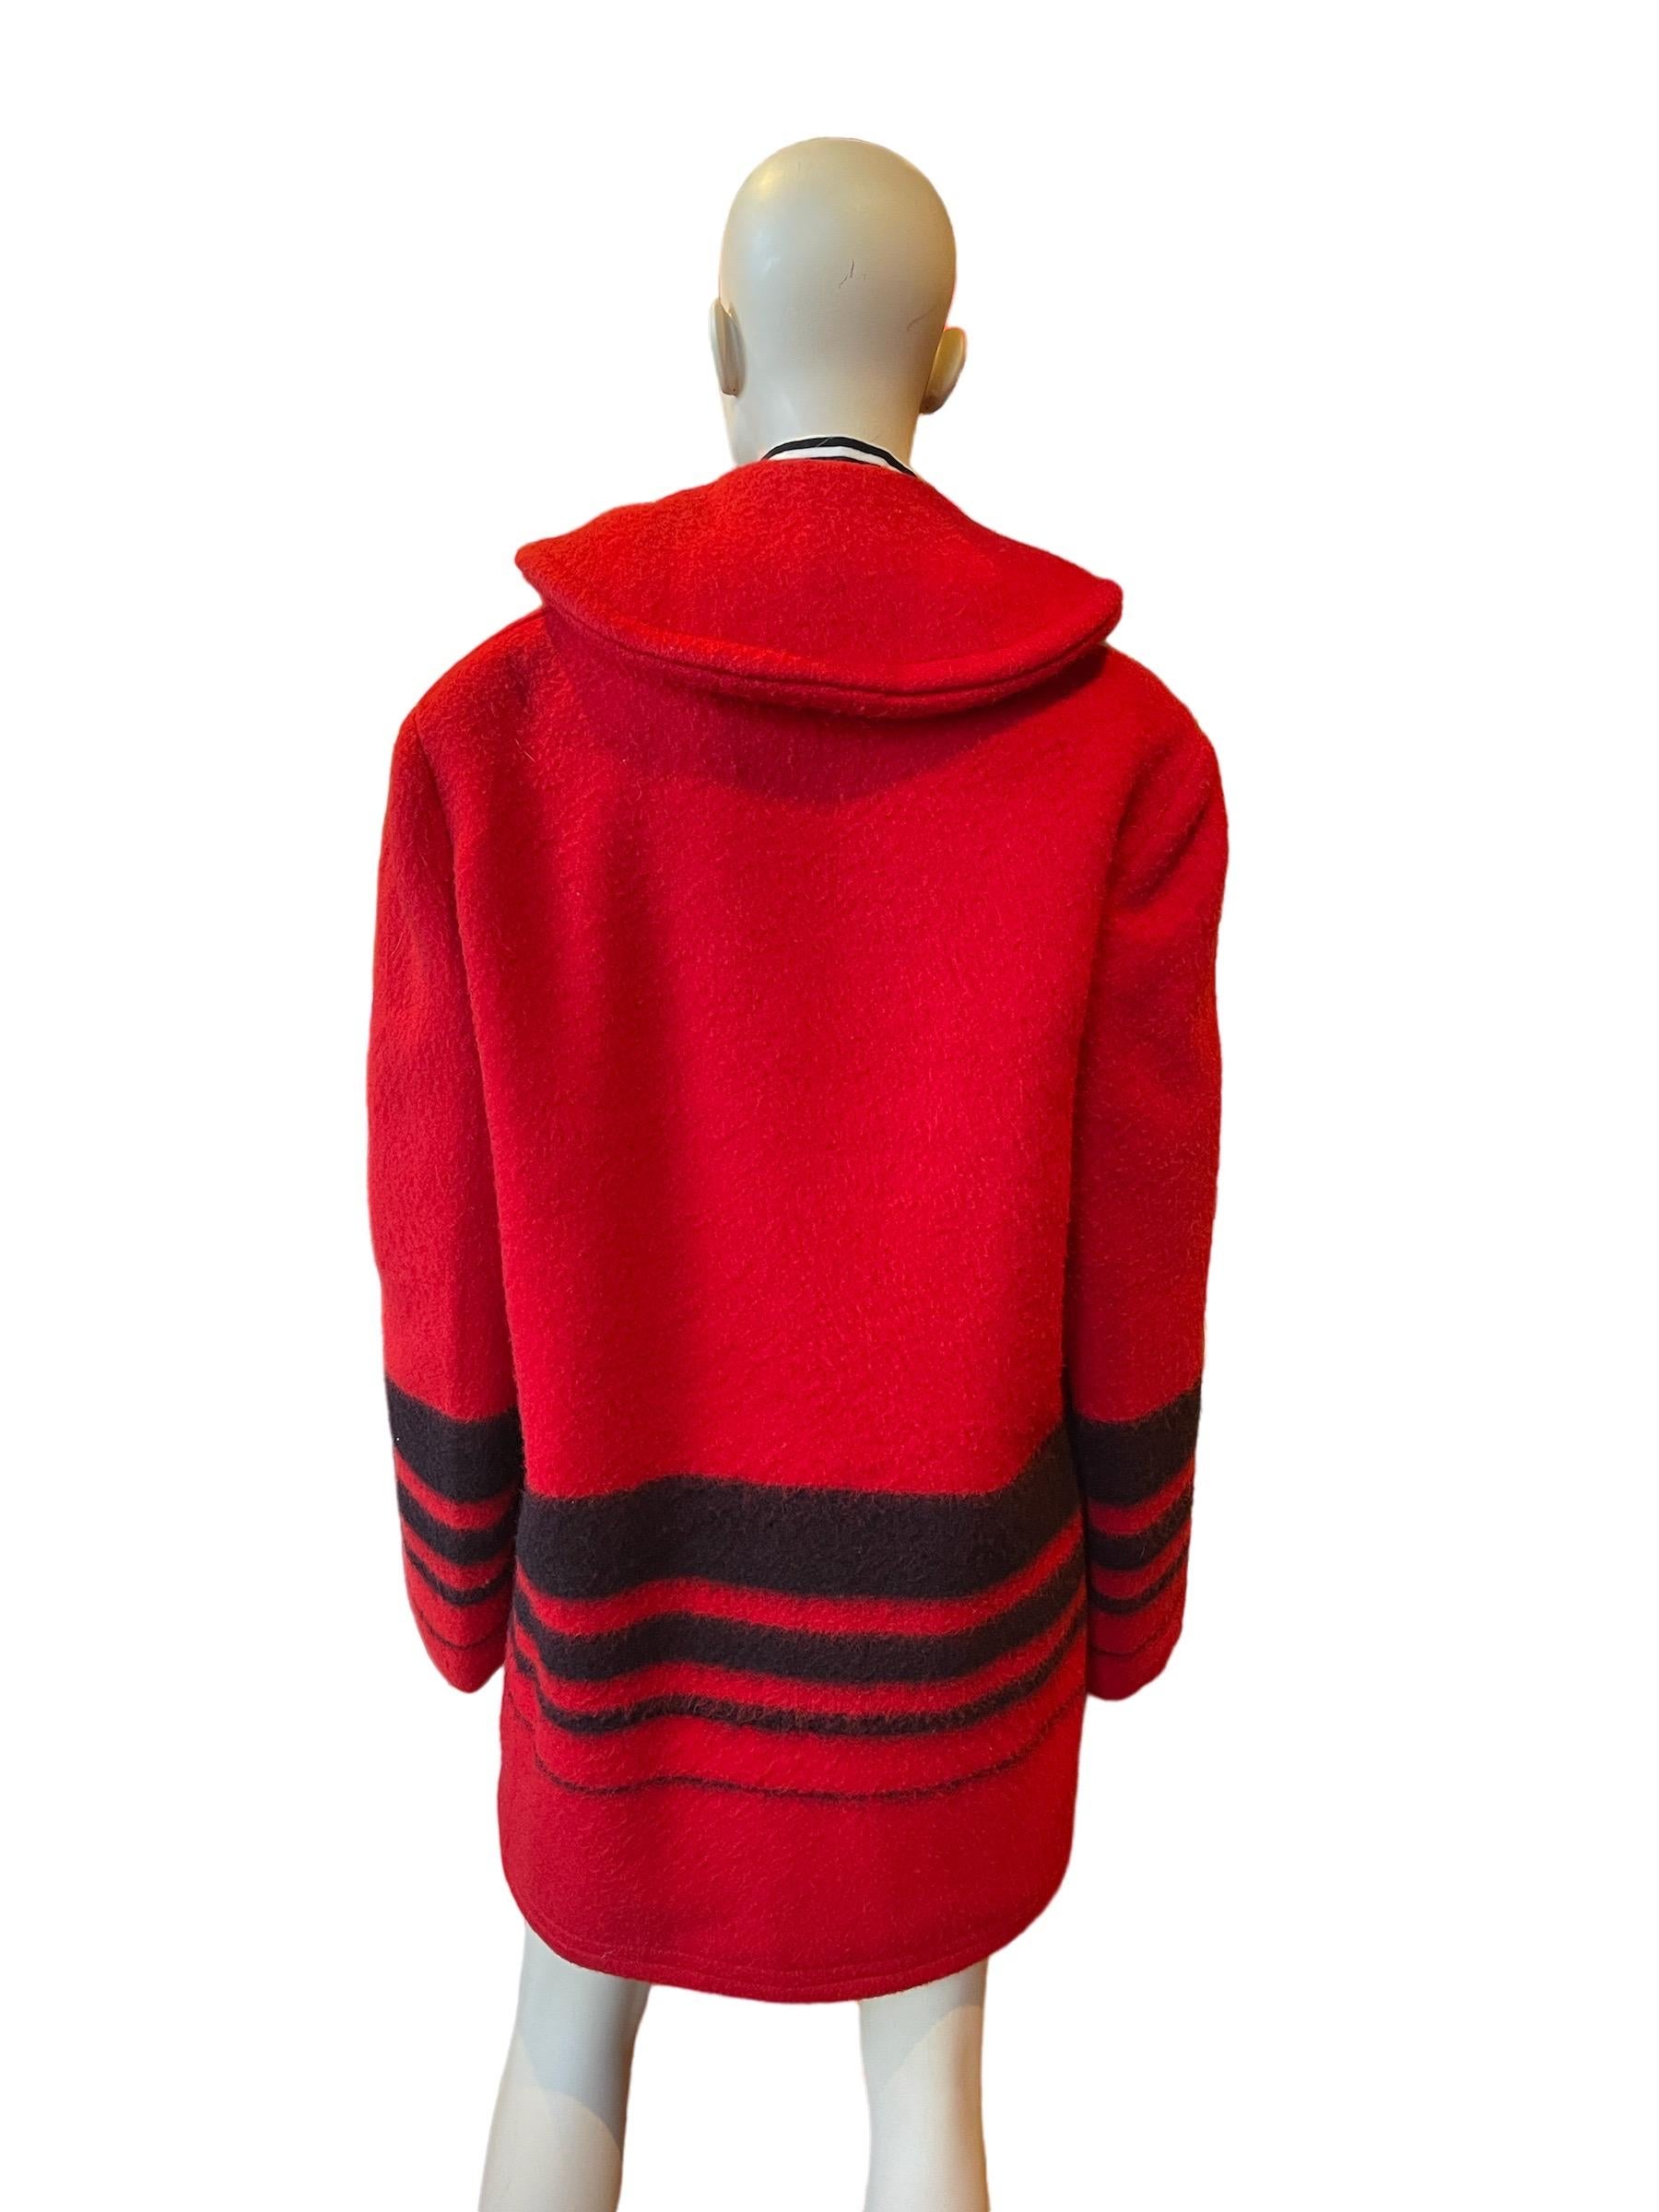 1960s Red and Black Buck Skein Brand Thermalized Wool Coat, Weather Control Lining

A beautiful red and black thermalized wool coat. Small holes on hood and elbow. 
